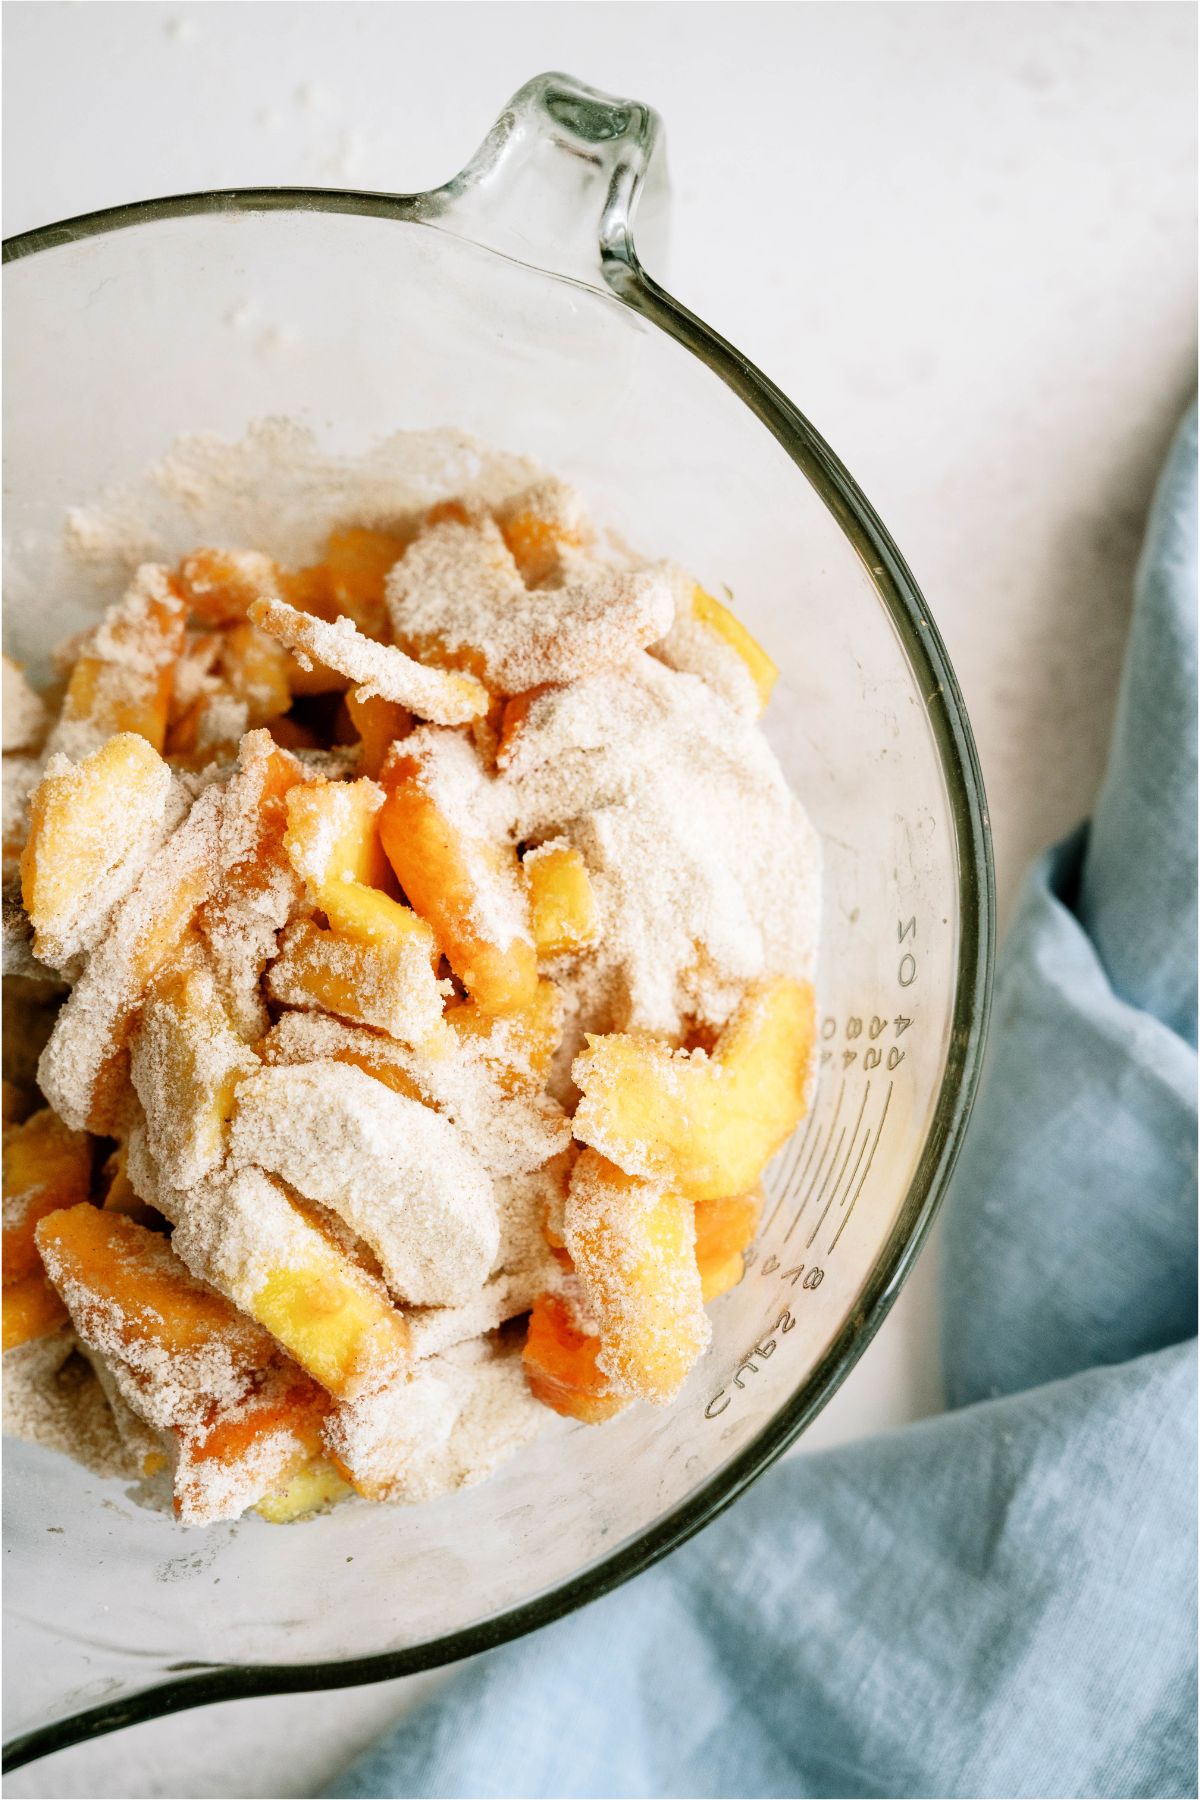 Peaches in mixing bowl with flour mixture sprinkled on top